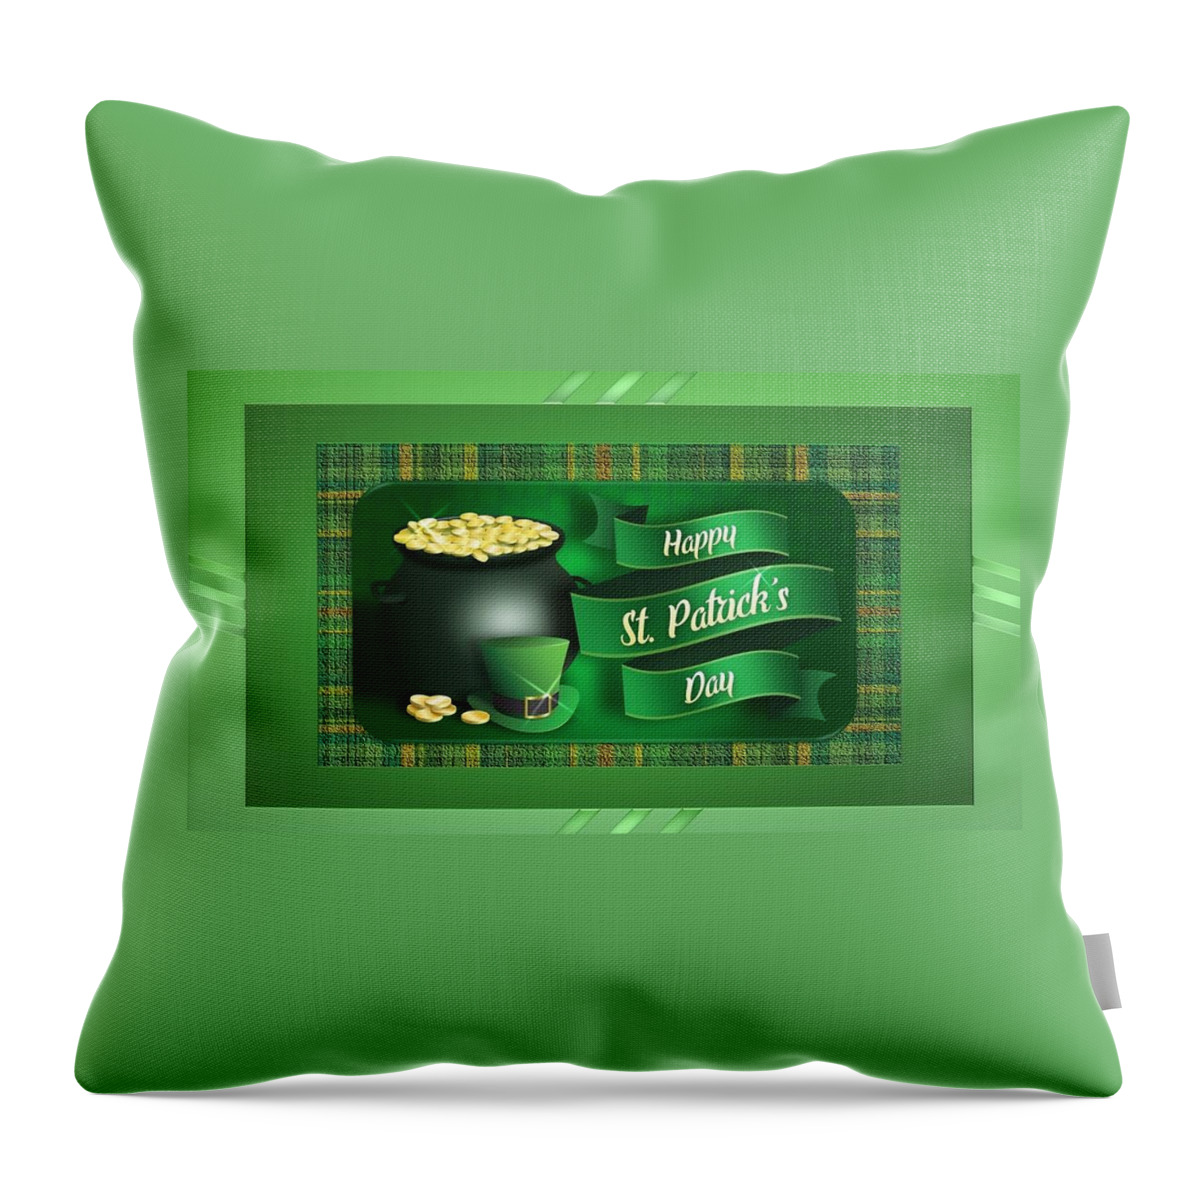 Happy Throw Pillow featuring the mixed media Happy St. Patrick's Day by Nancy Ayanna Wyatt